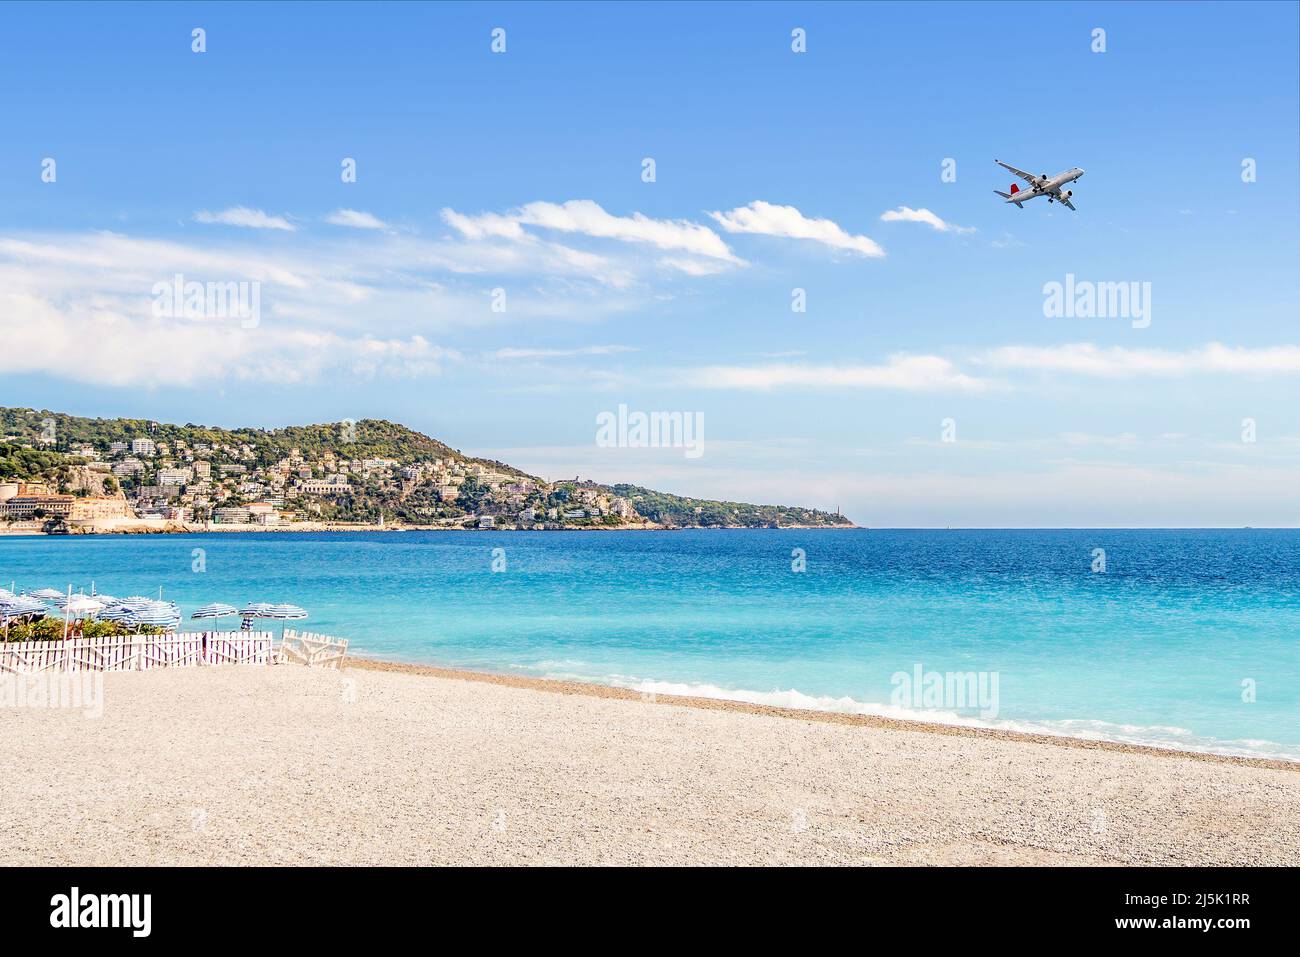 Beach and plane. Flight to vacation destination by the sea. Holiday landscape. Airline flying to summer paradise. Airplane on blue sky. Stock Photo